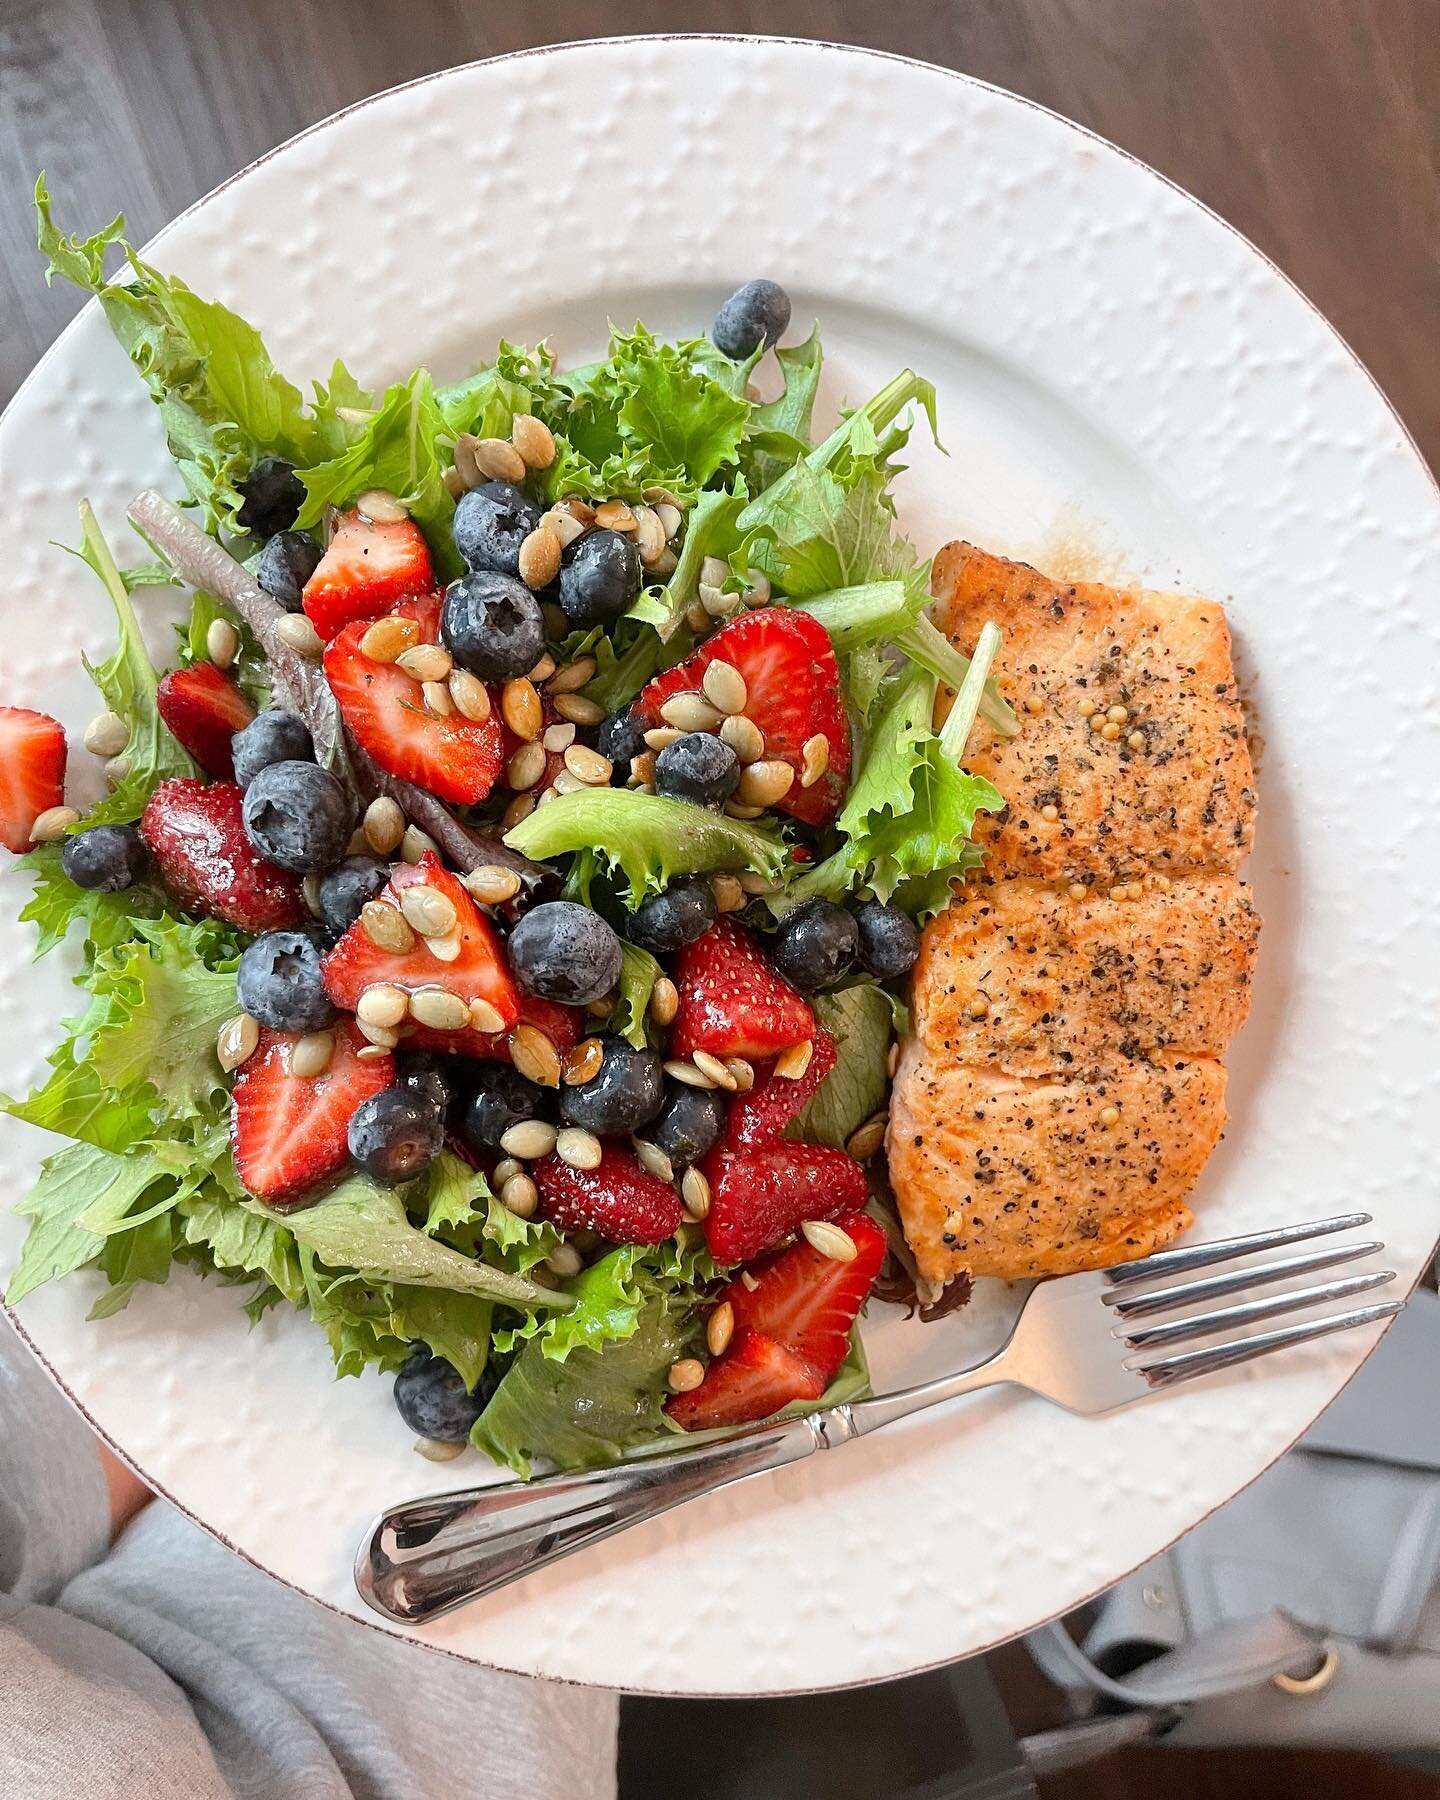 ✨FAST + FILLING✨ Lunch Recipe

Ingredients:
- 5oz salmon filet 
- Paul Perdon Seafood Magic Seasoning 
- 2 cups Spring Mix
- 1/3 cup sliced strawberries 
- 1/3 cup blueberries 
- 1oz roasted + lightly salted pepitas 
- 1Tbs balsamic Vinegar + 1 Tbs o